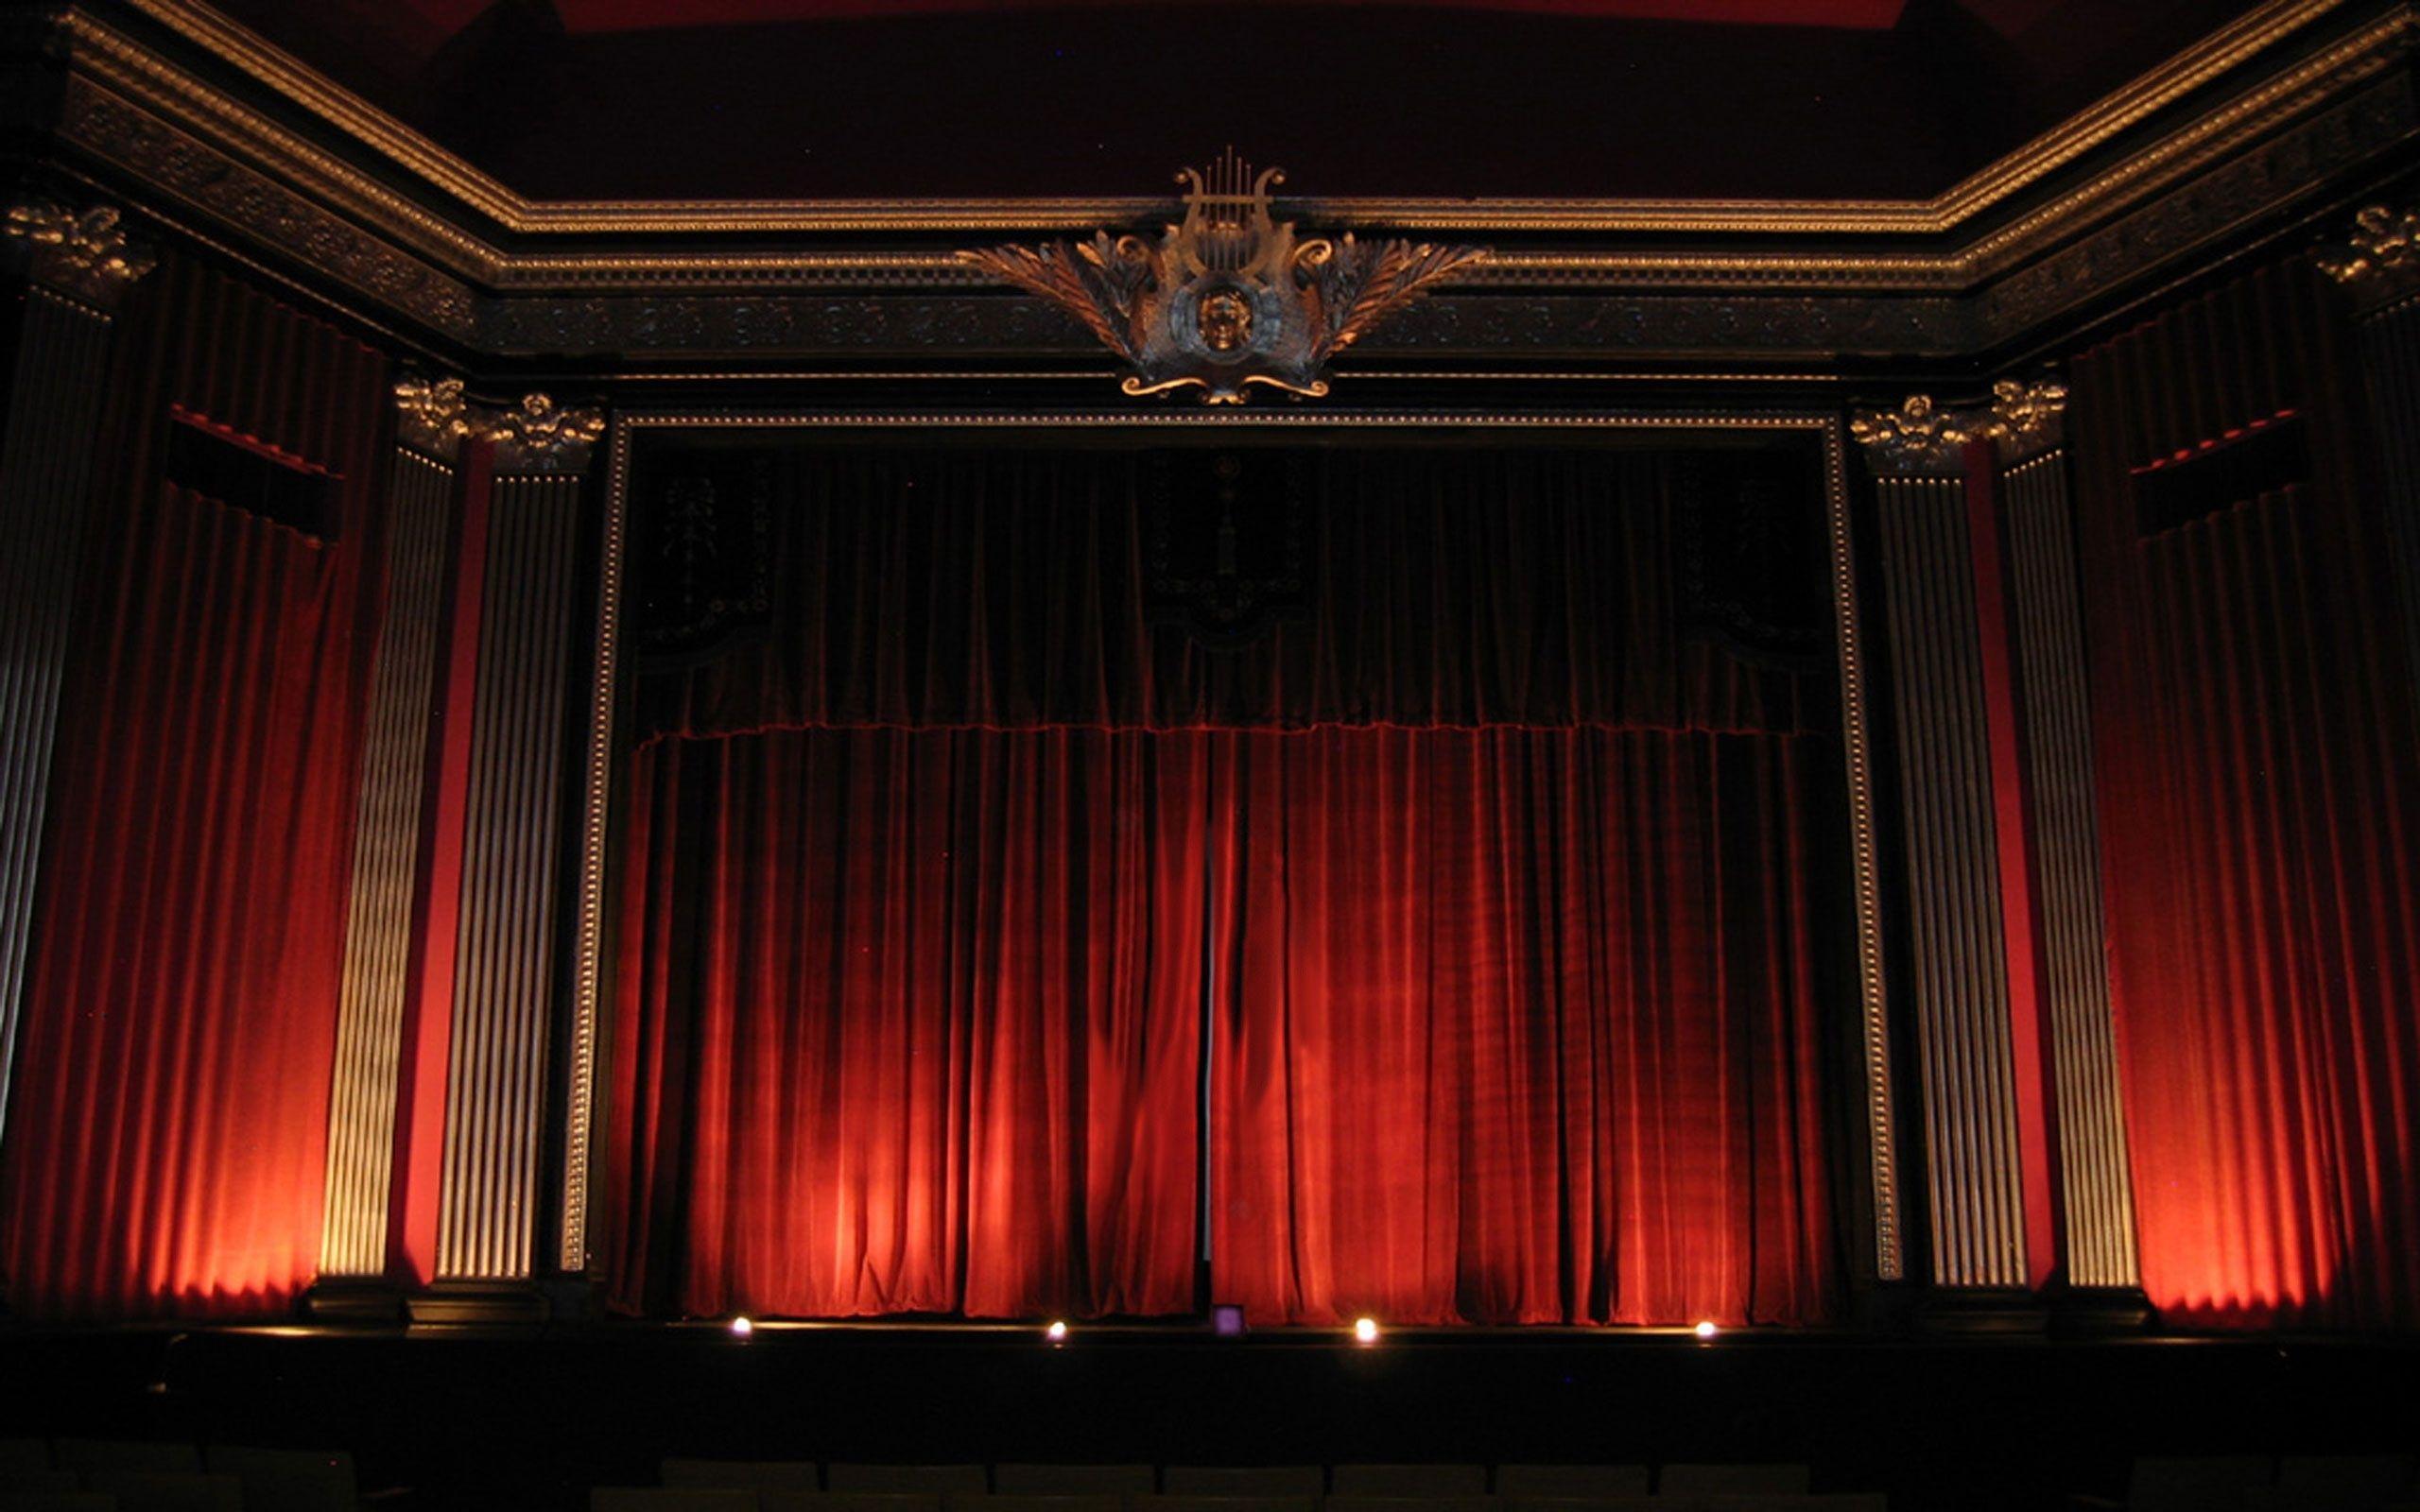 theater curtains and molding -without the ornate capitals